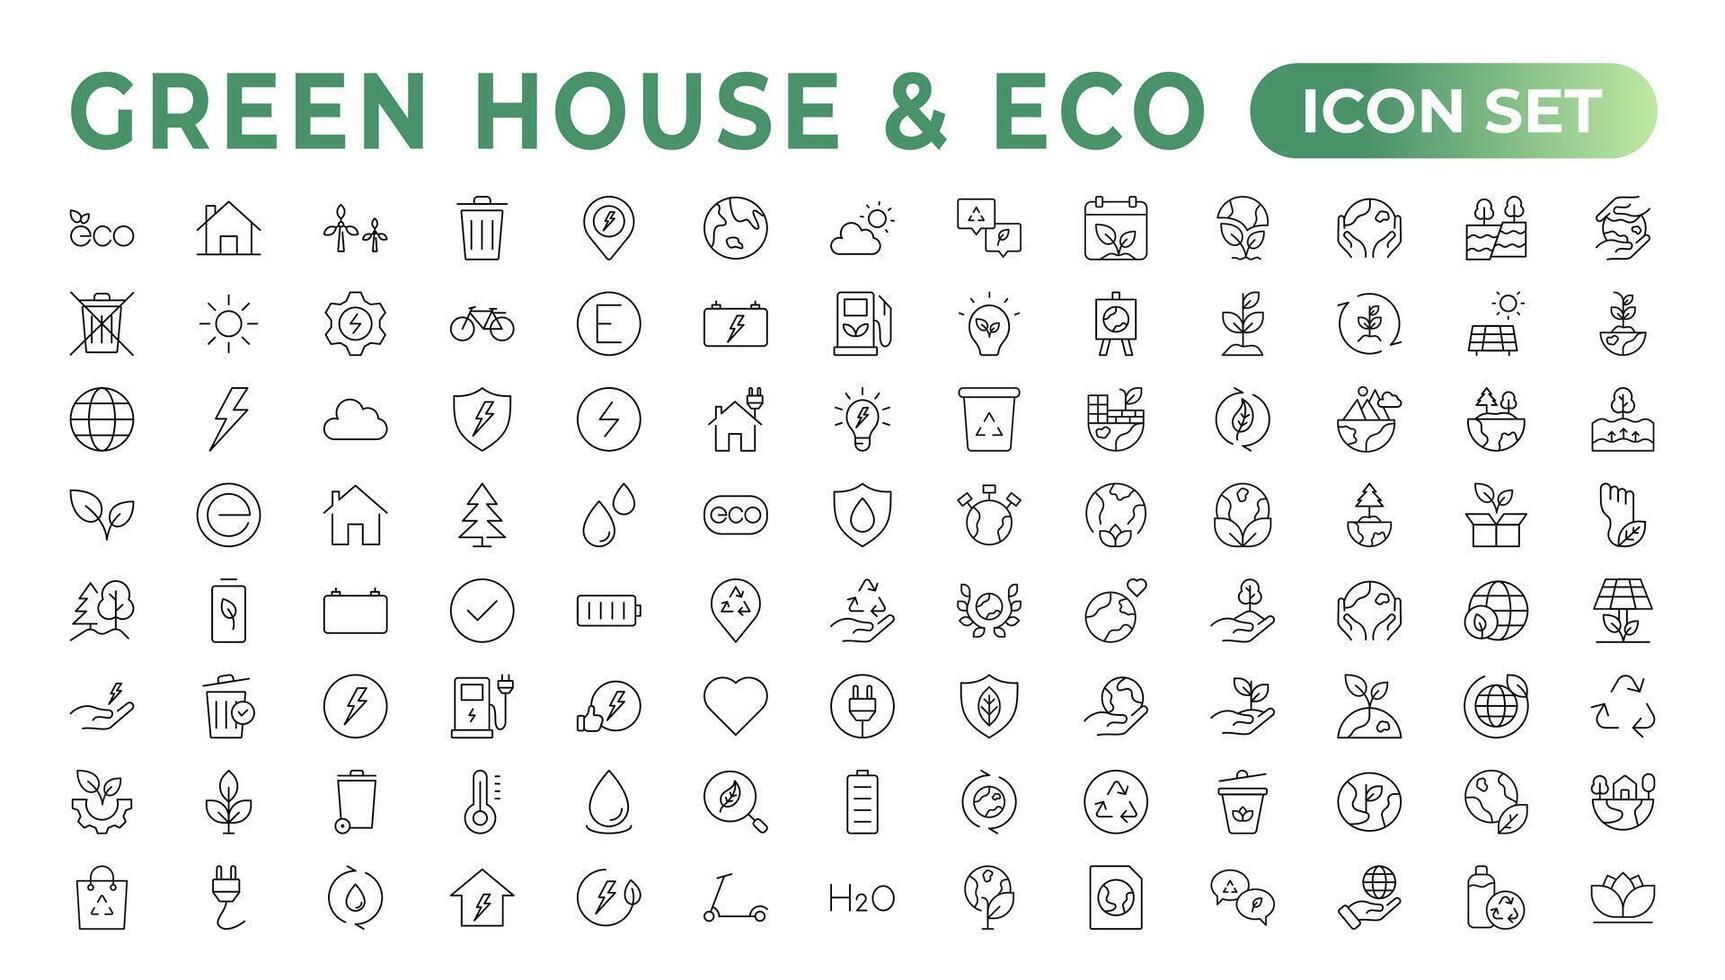 Eco-friendly related thin line icon set in minimal style. Linear ecology icons. Environmental sustainability simple symbol. Simple Set of  Line Icons.Global Warming, Forests, Organic Farming. vector